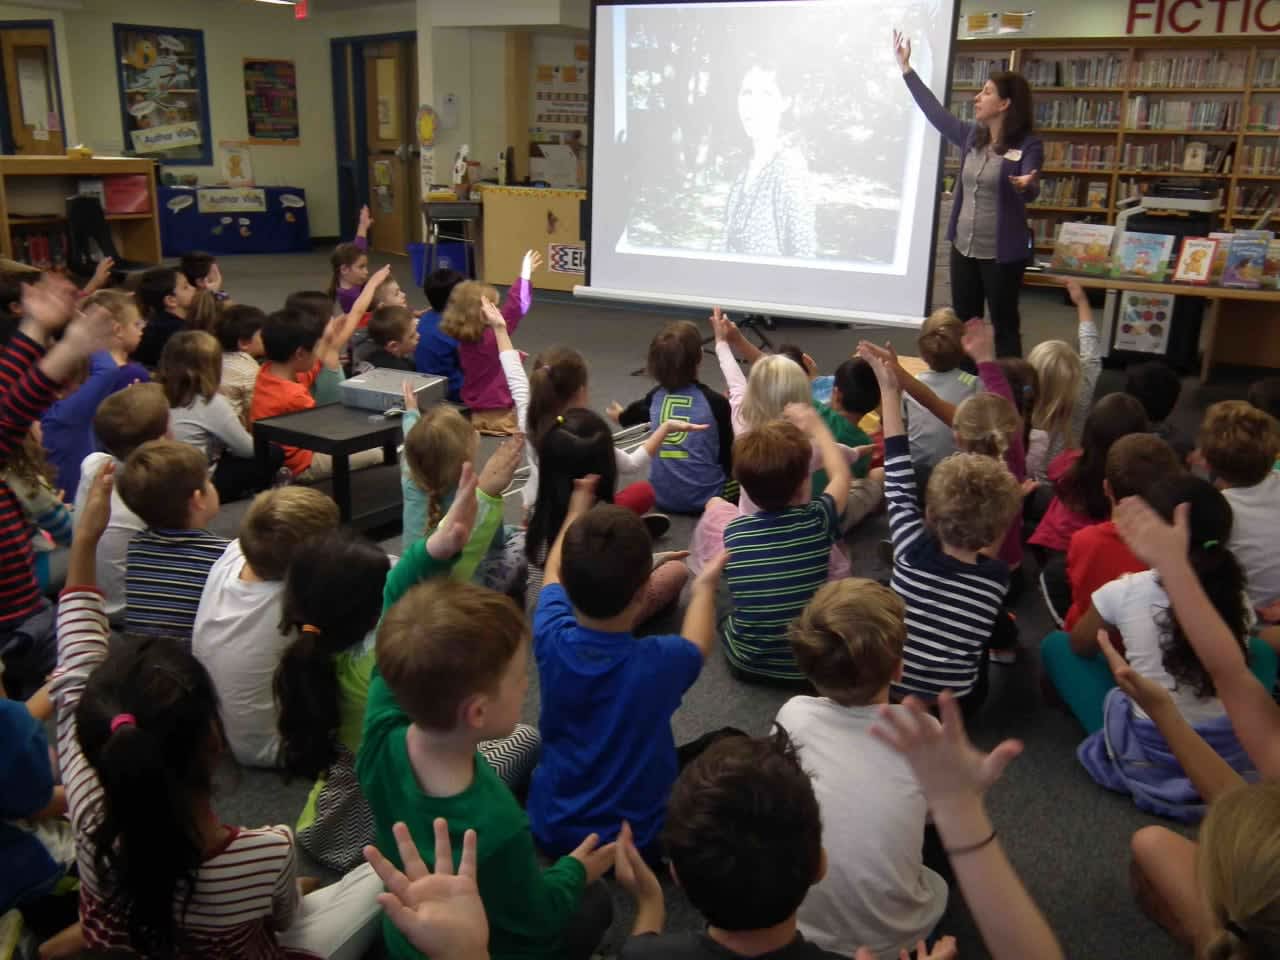 Alyssa Capucilli, author of the popular “Biscuit” book series, spoke with Todd Elementary School’s kindergarten and first-grade students about how she creates stories during a recent visit.